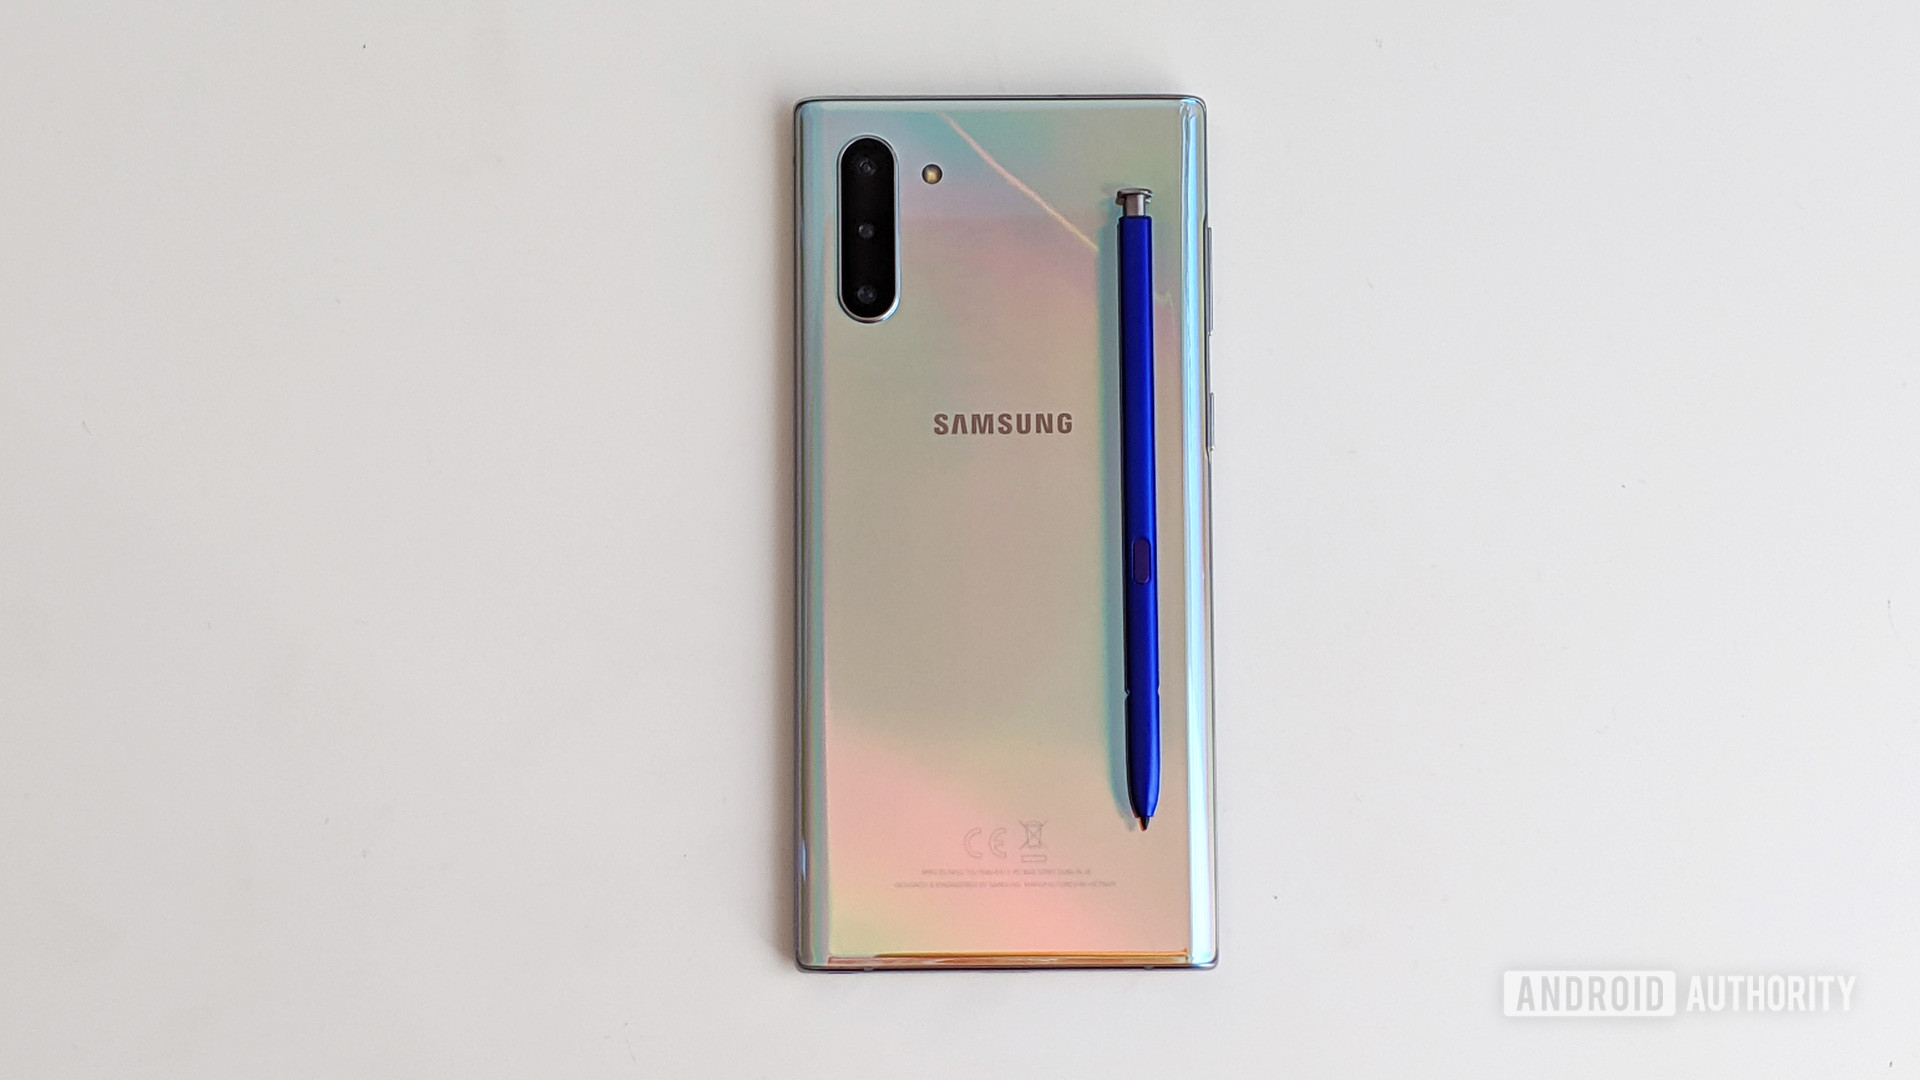 Samsung Galaxy Note 10 back view with S Pen